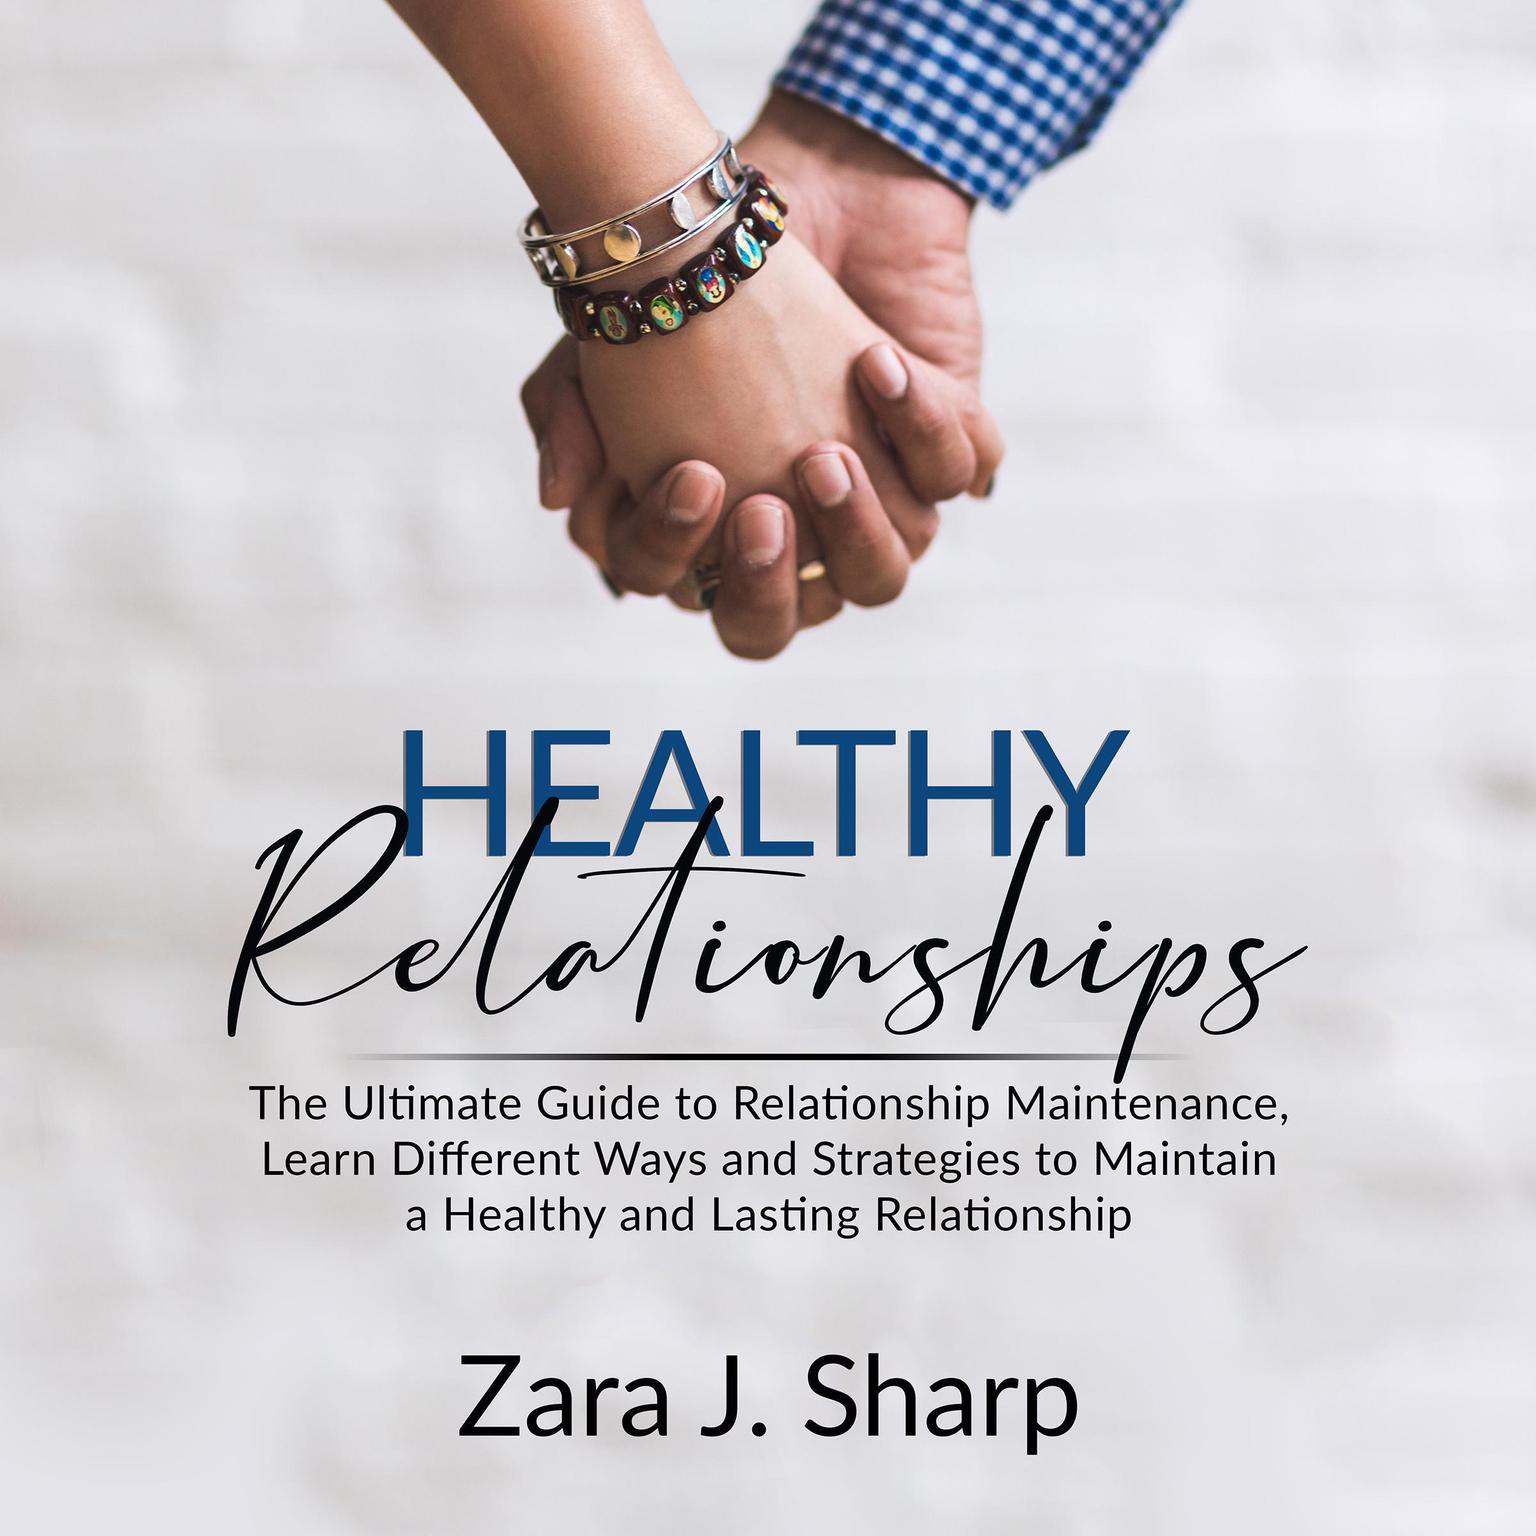 Healthy Relationships: The Ultimate Guide to Relationship Maintenance, Learn Different Ways and Strategies to Maintain a Healthy and Lasting Relationship Audiobook, by Zara J. Sharp